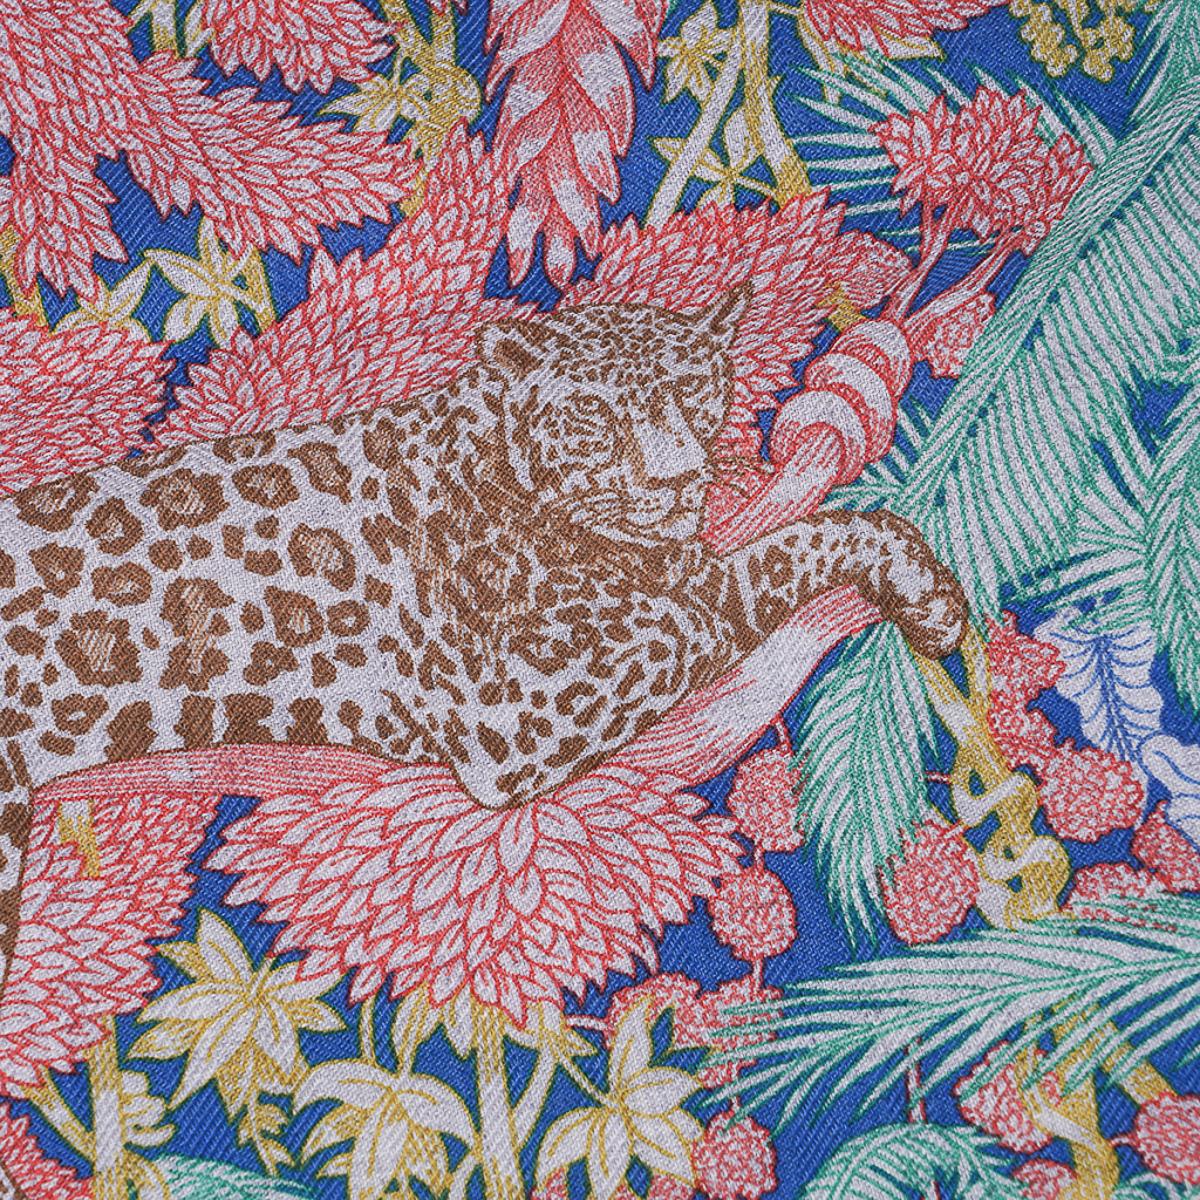 Mightychic offers an Hermes Faubourg Tropical Cashmere and Silk scarf by Octave Marsal
and Theo Gueltzl.
Featured in Bleu, Vert and Gris colorway.
This Hermes Cashmere and silk shawl is set with a wonderful tropical jungle filled with marvelous